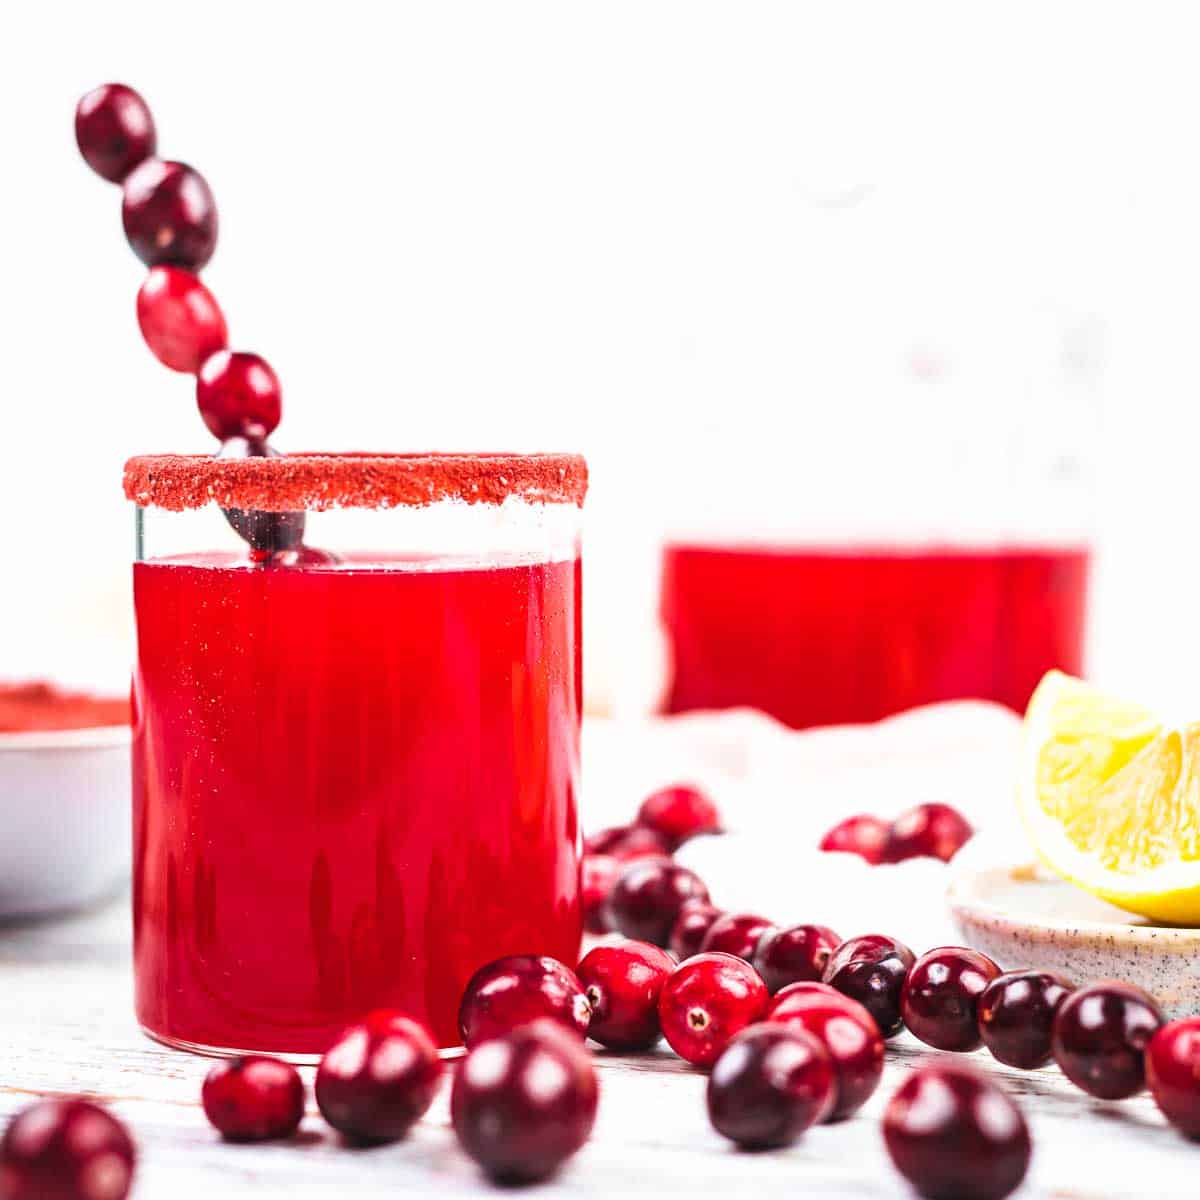 Cranberry juice with lemon wedges and cranberries.